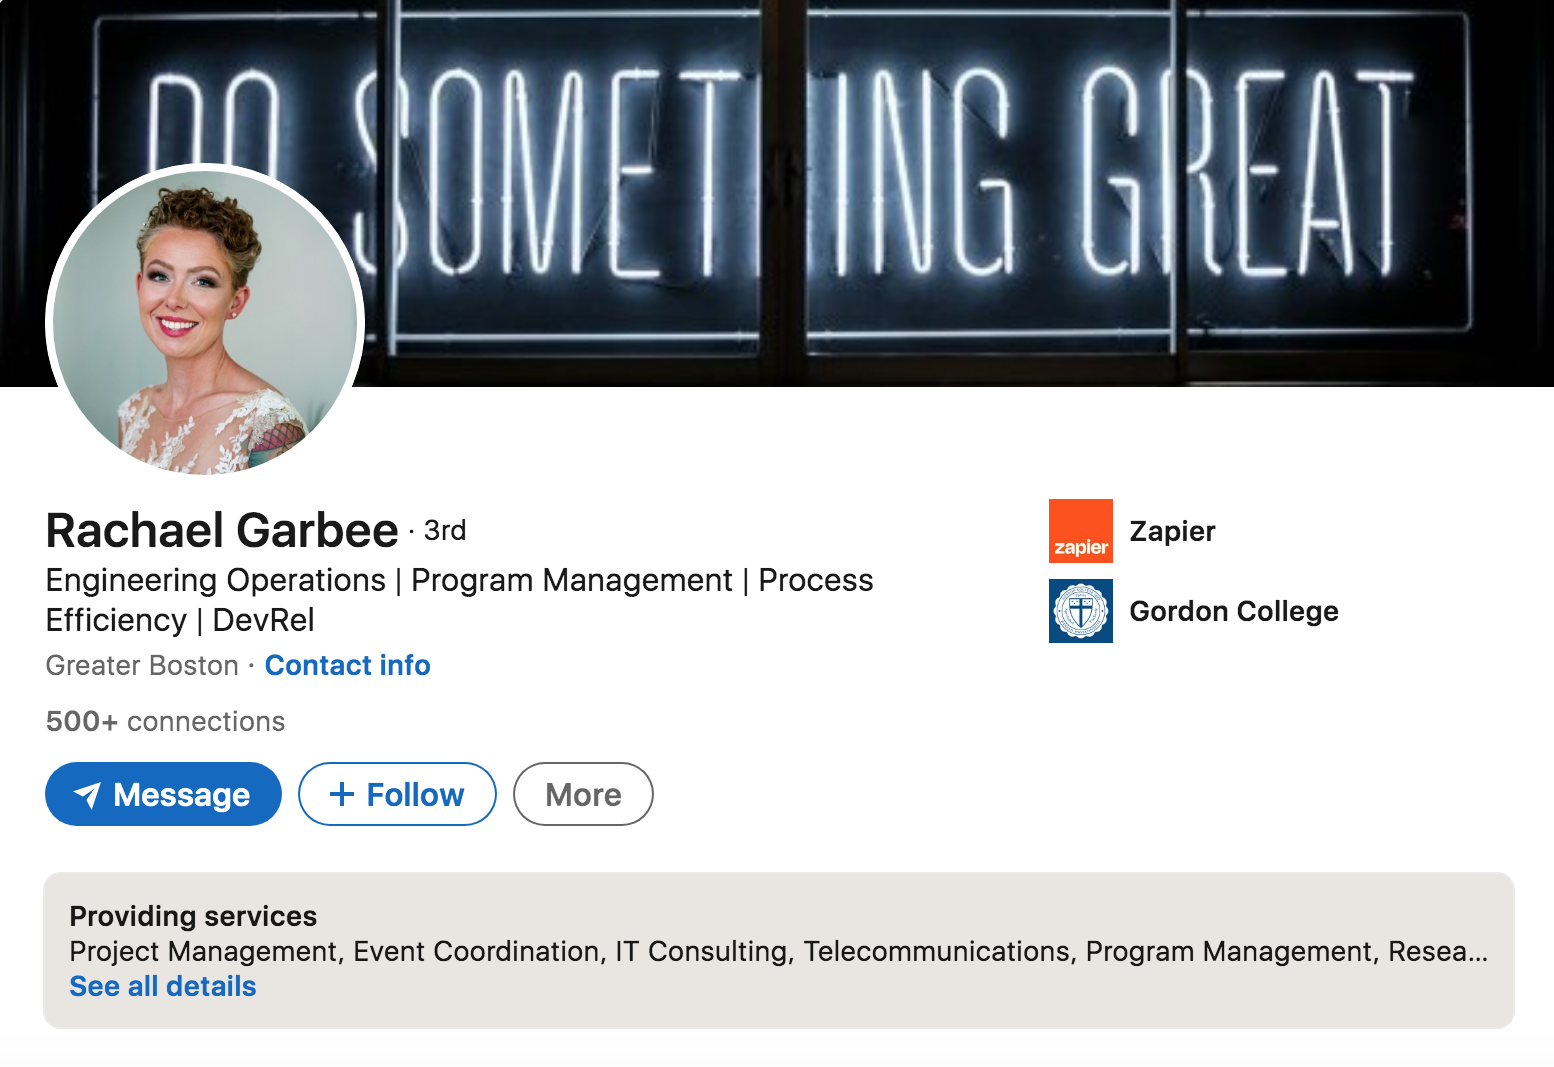 What's the Best LinkedIn Background for Your Profile?